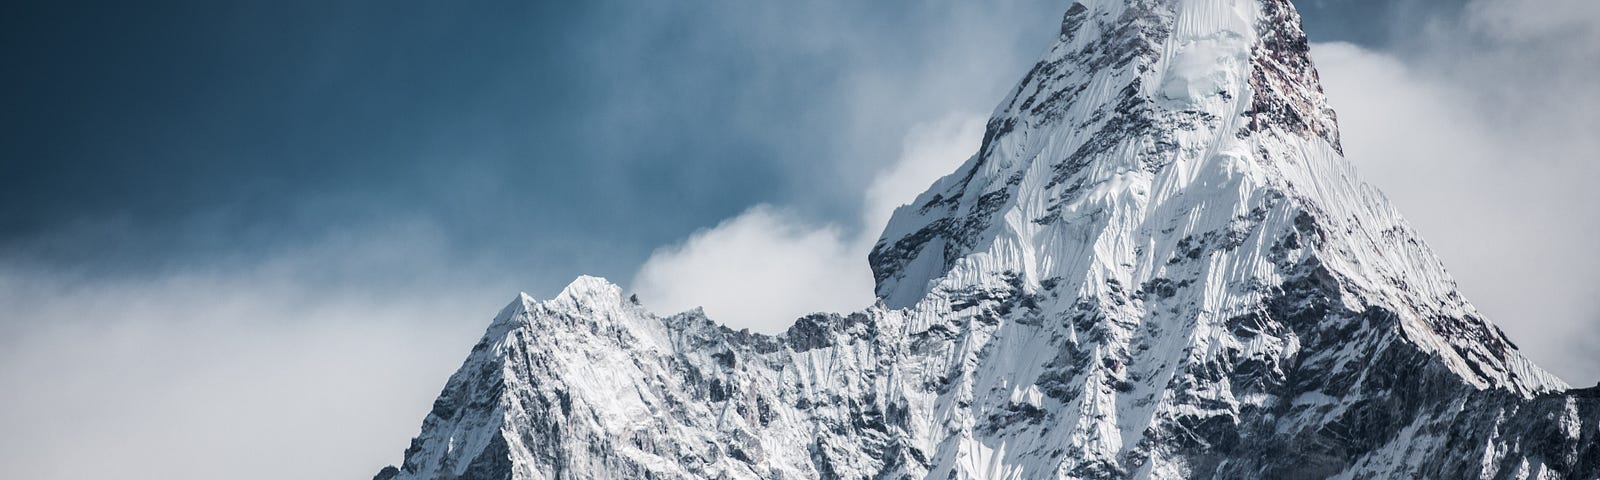 Bluish image of the summit of mountain Everest, covered in snow.